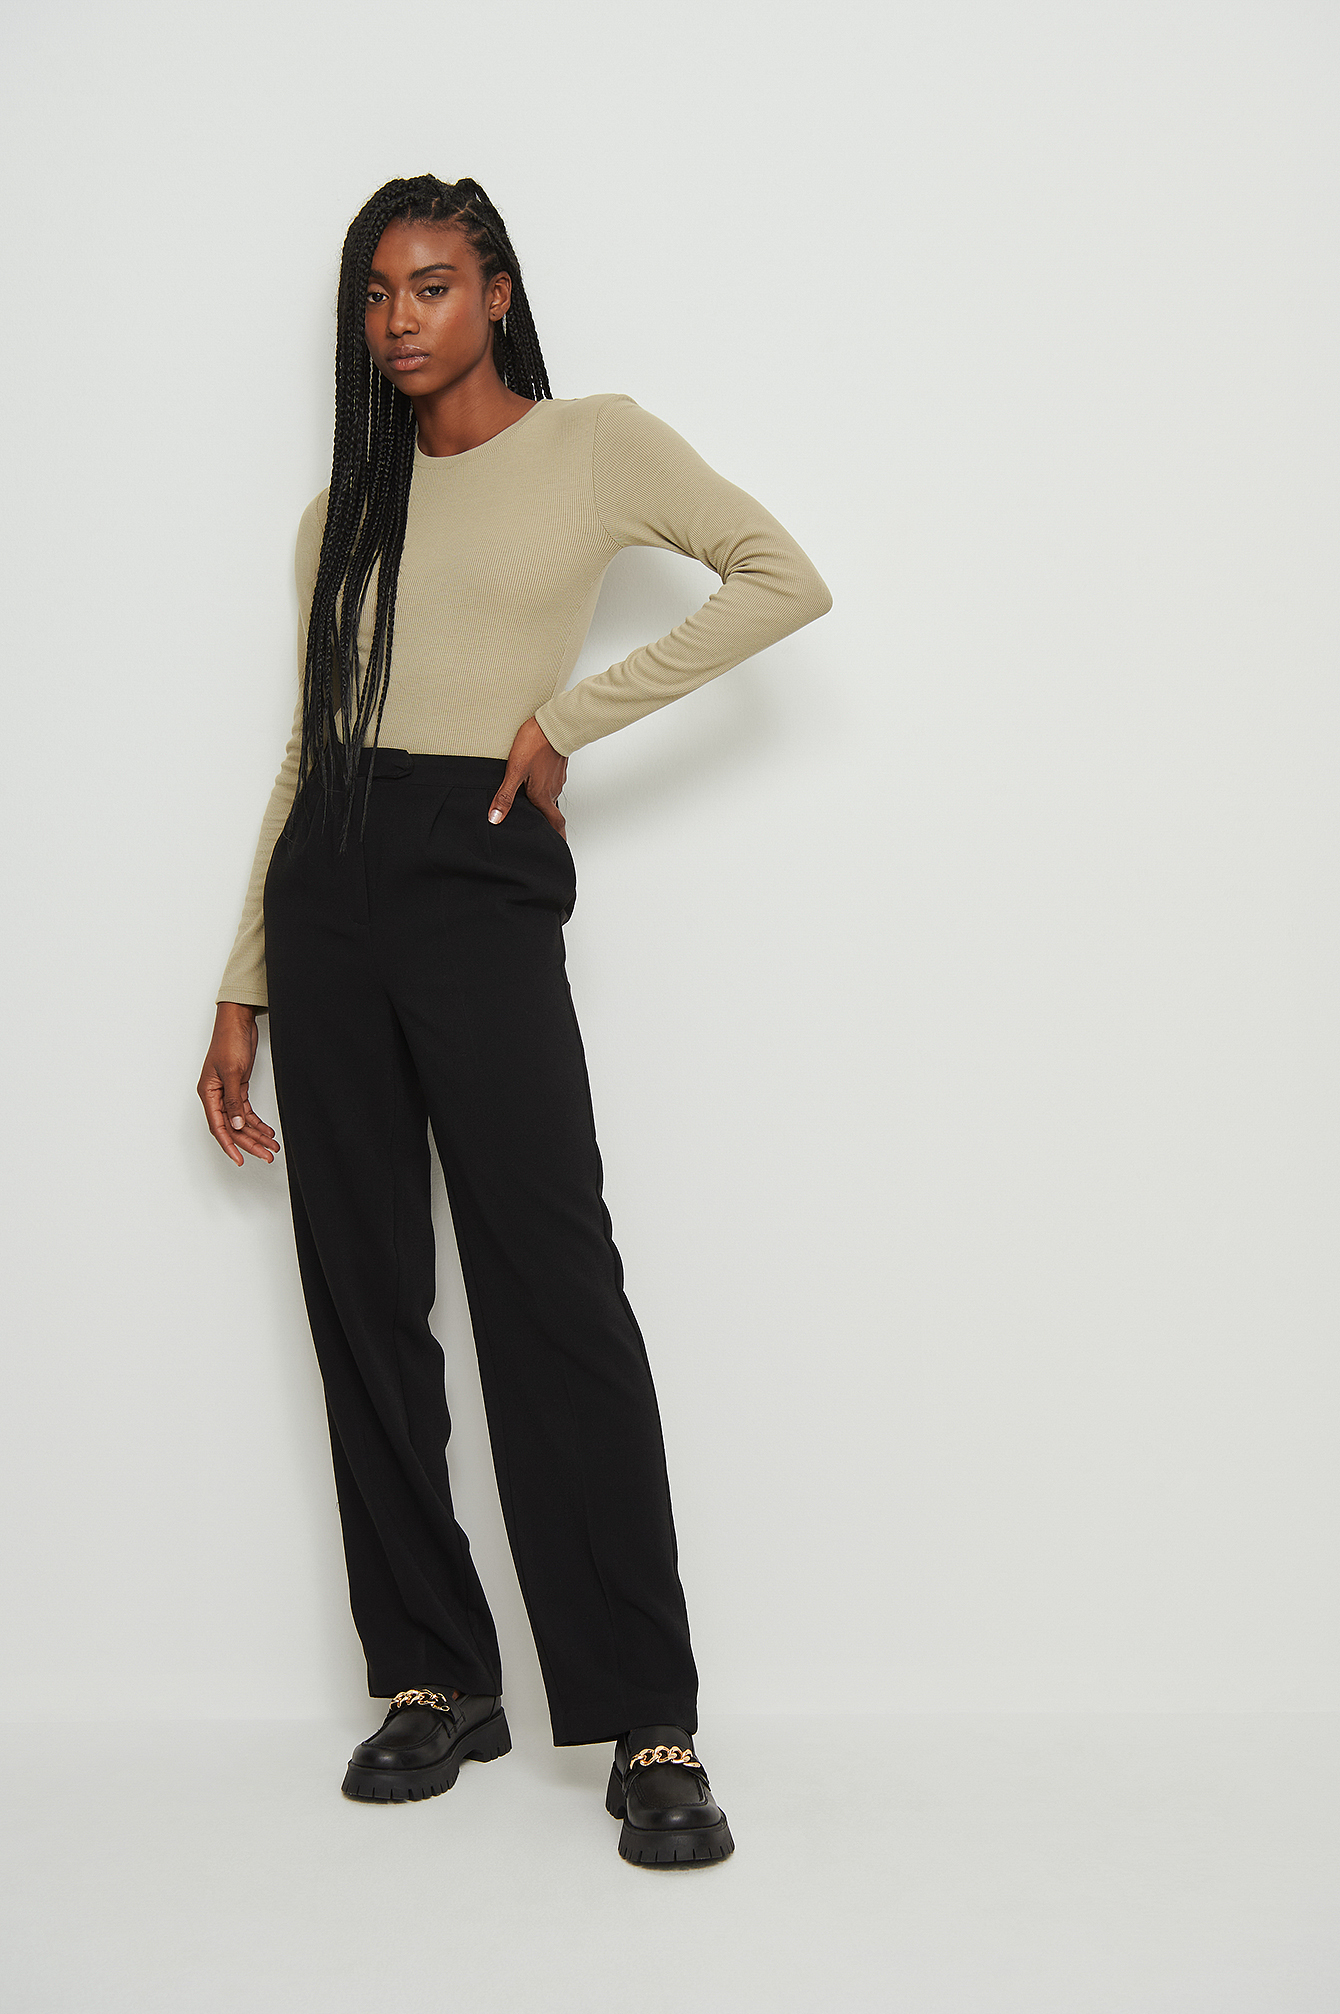 Recycled Round Neck Long Sleeved Ribbed Top Outfit